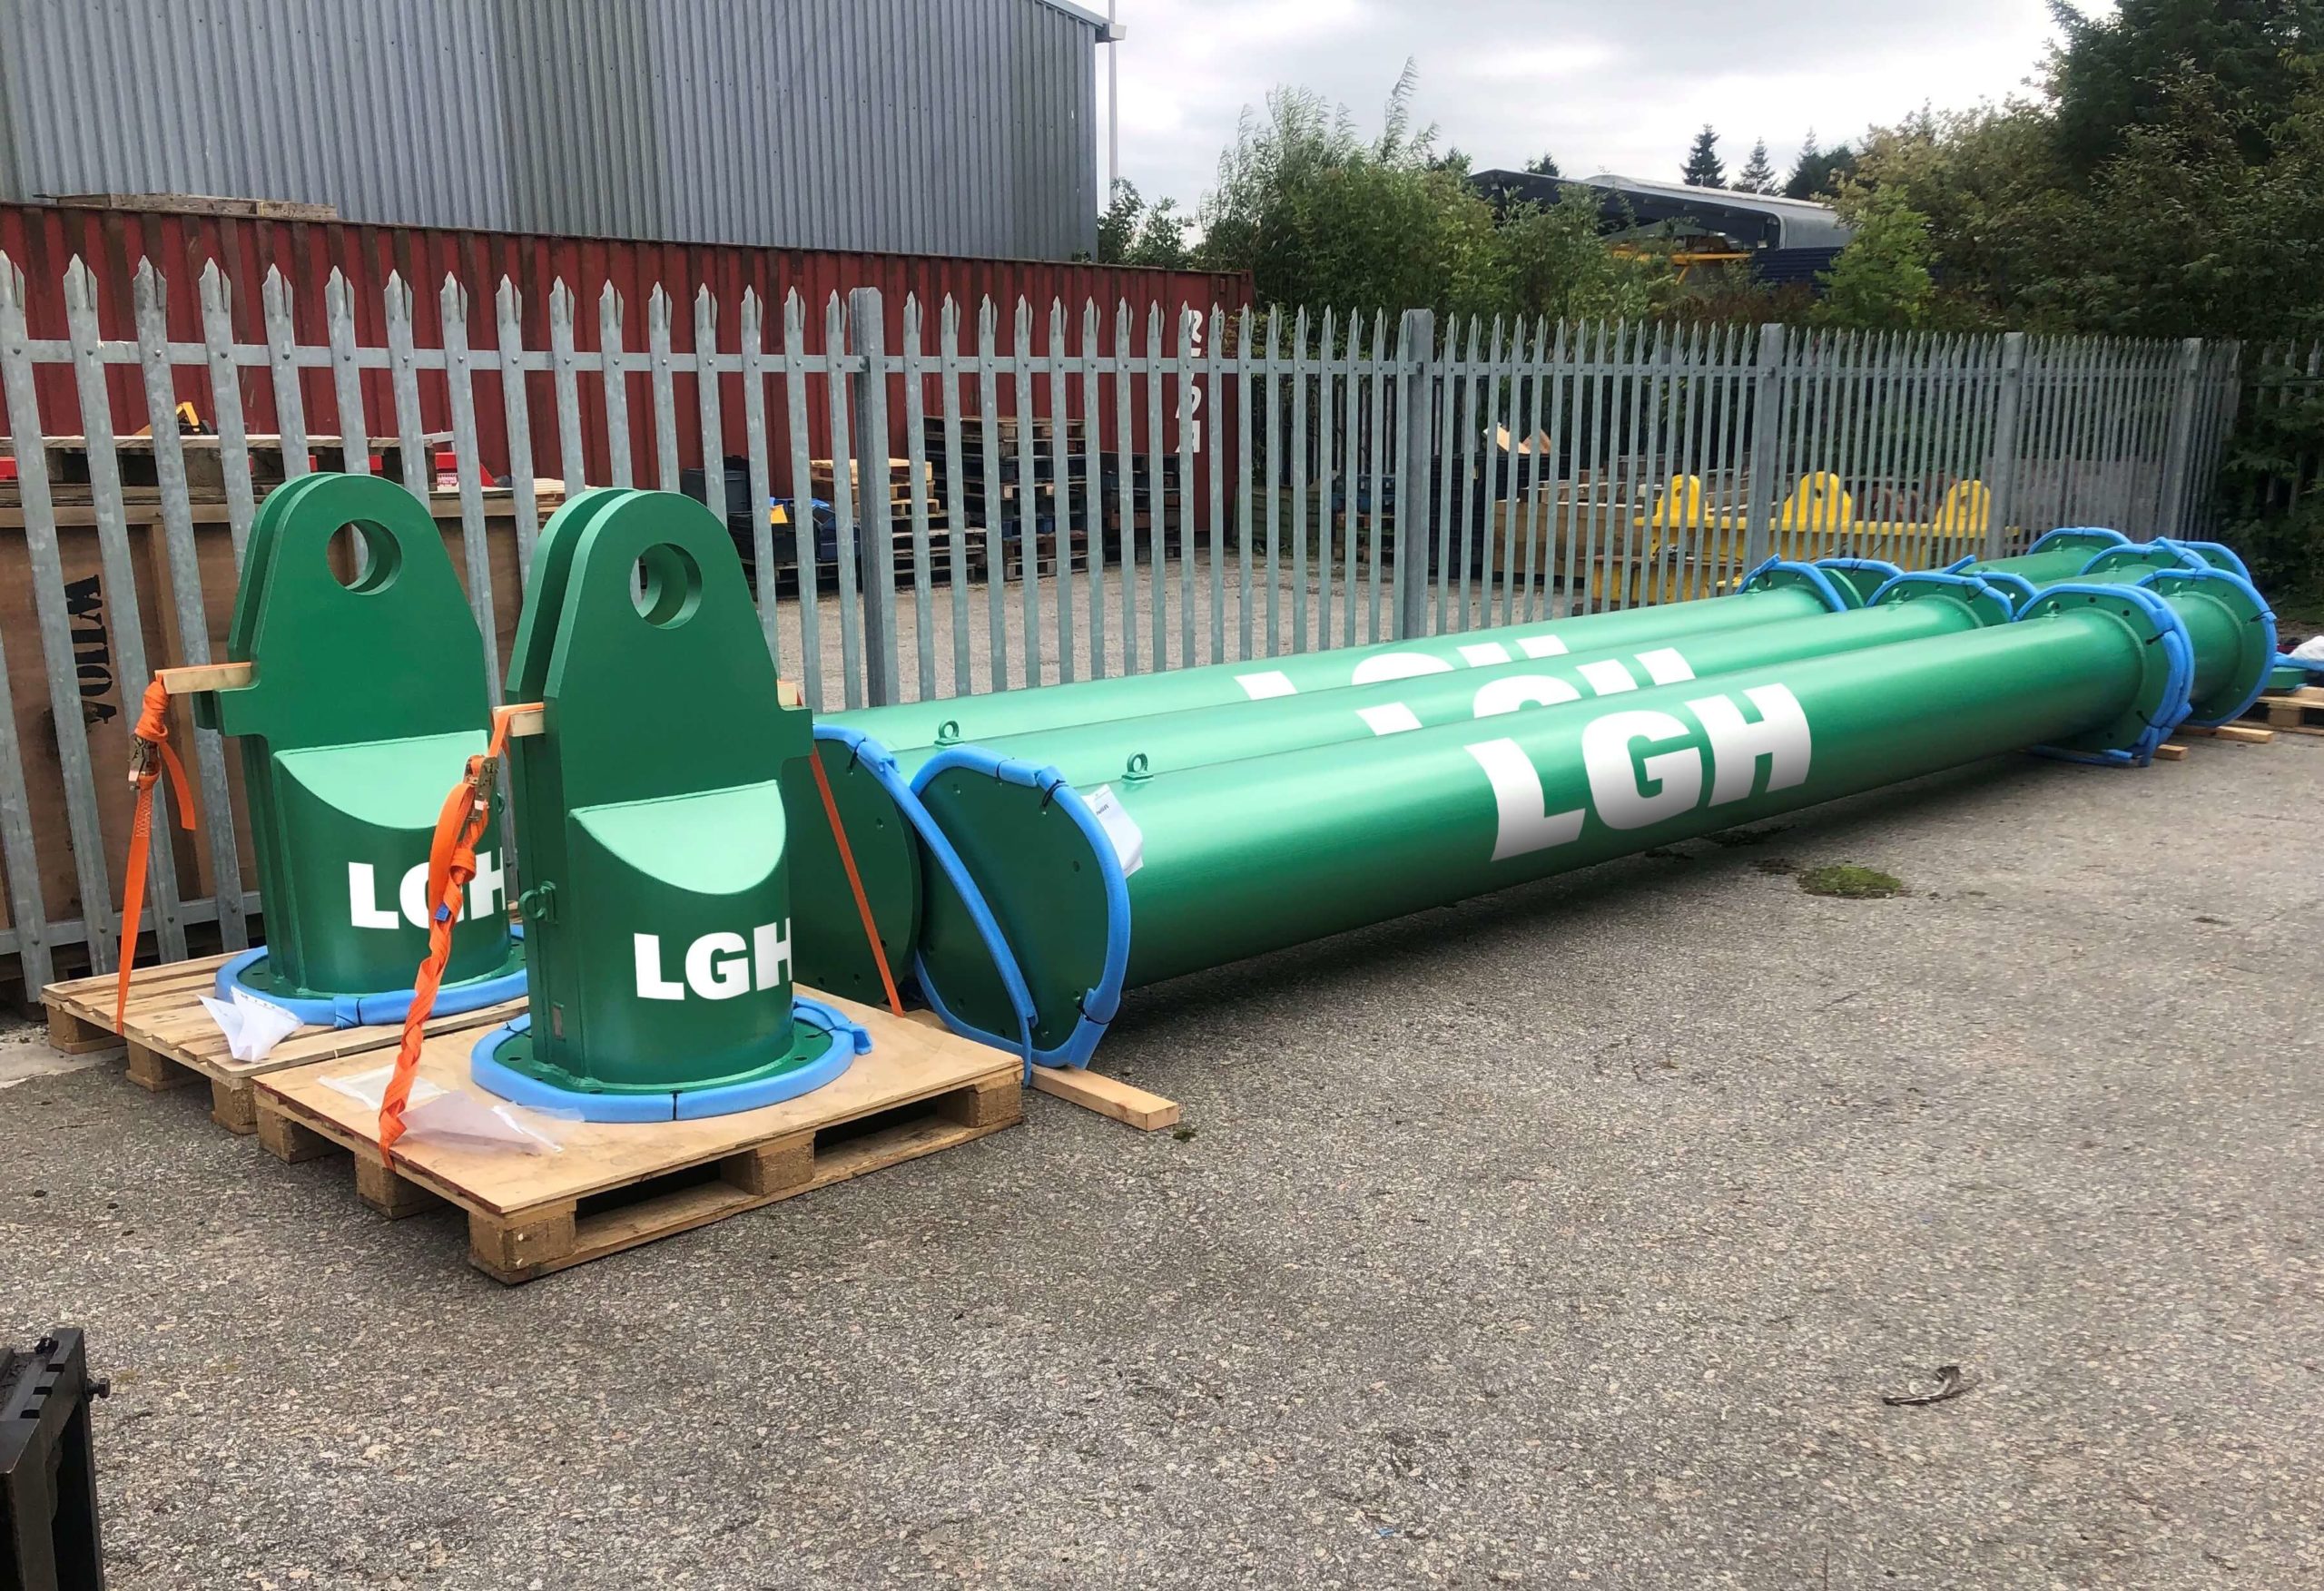 LGH Responds to Demand by Increasing Spreader Beam Availability with Latest MOD 400/600 Investment